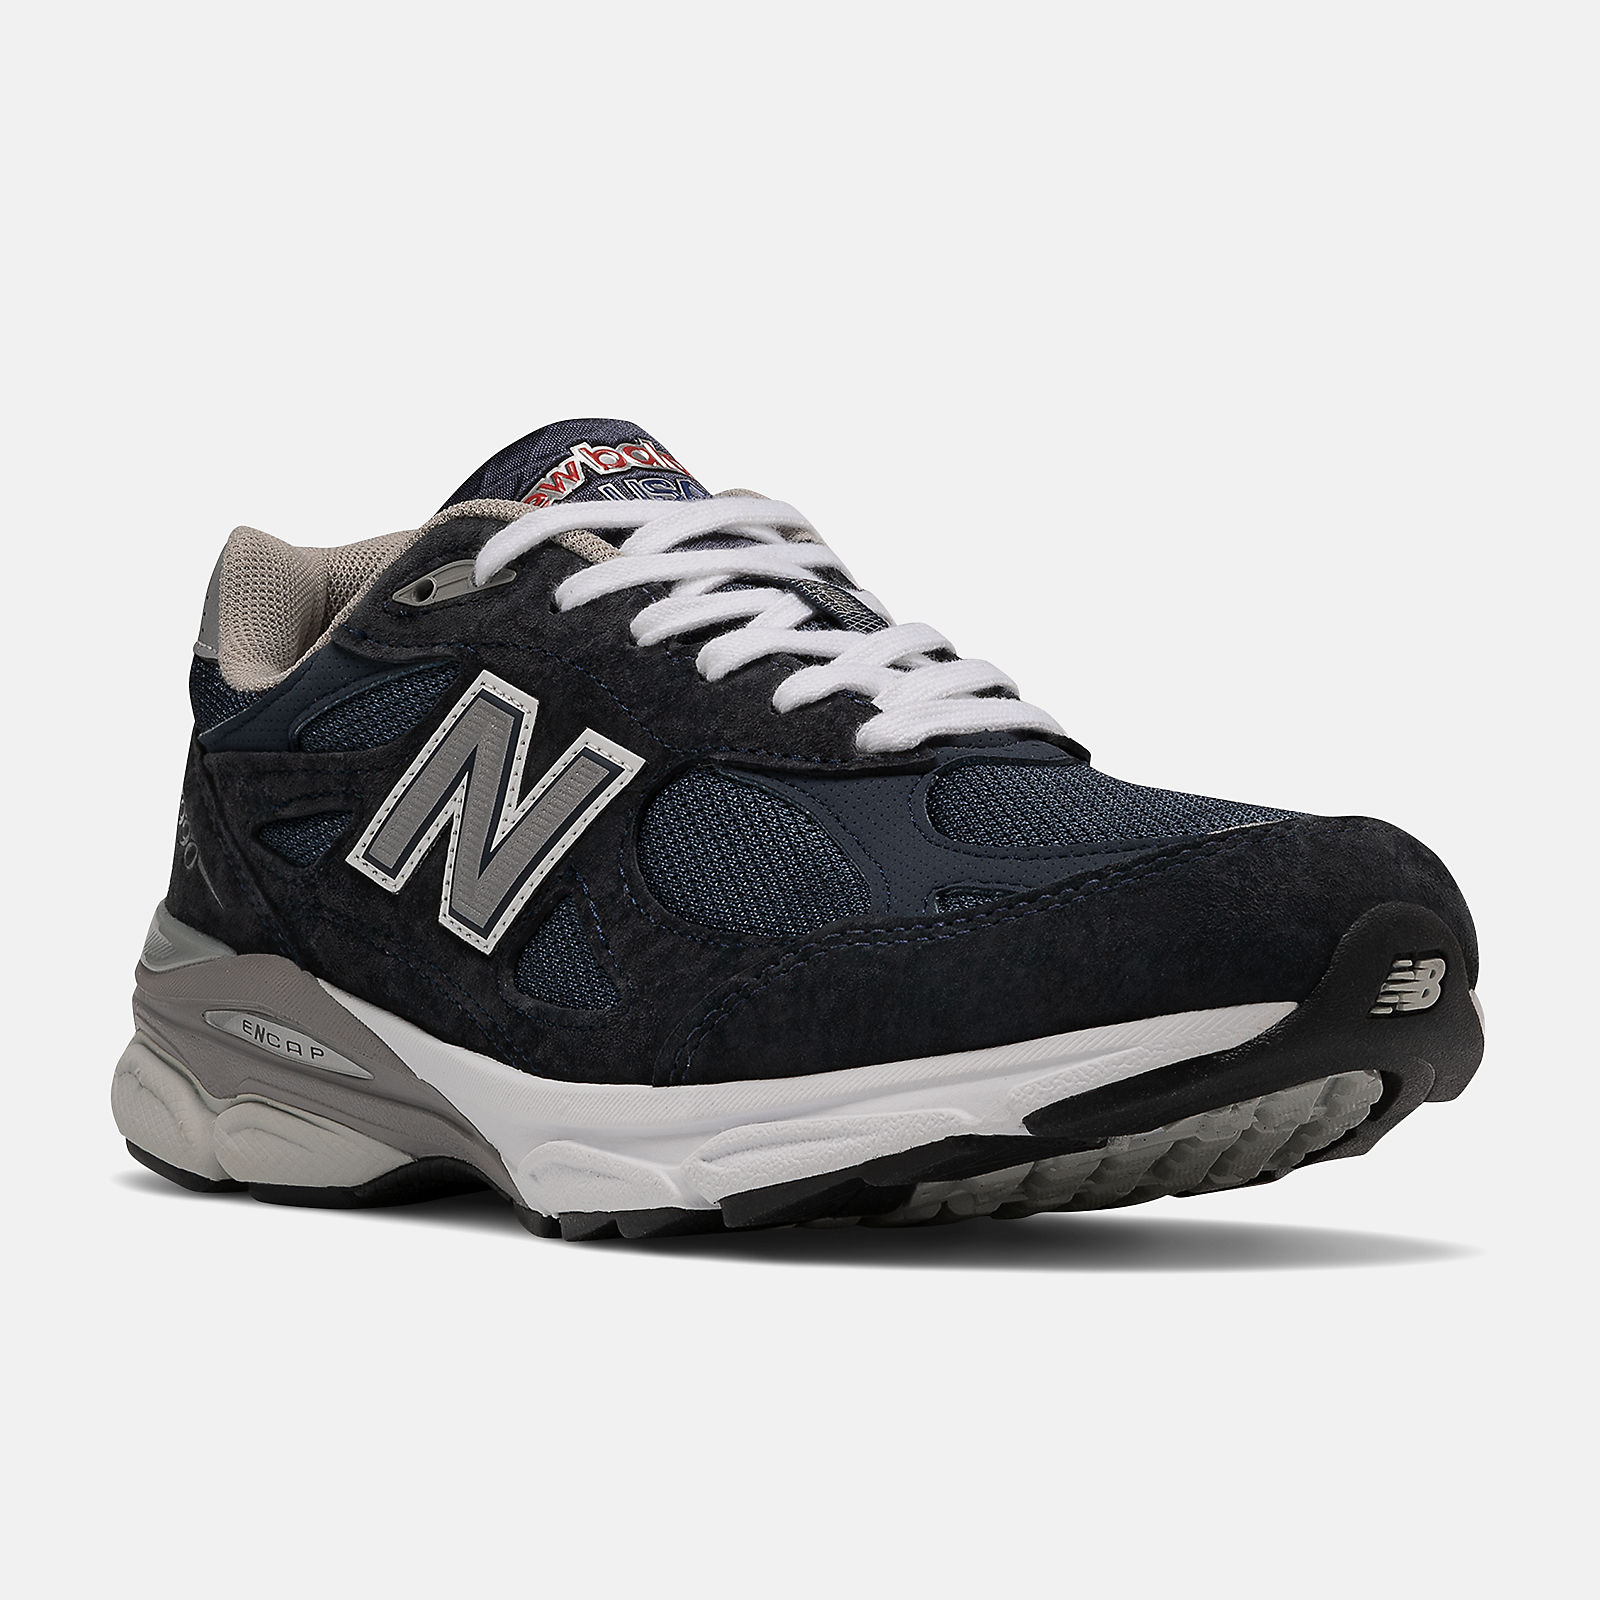 protest reap commentator MADE in USA 990v3 Core - New Balance